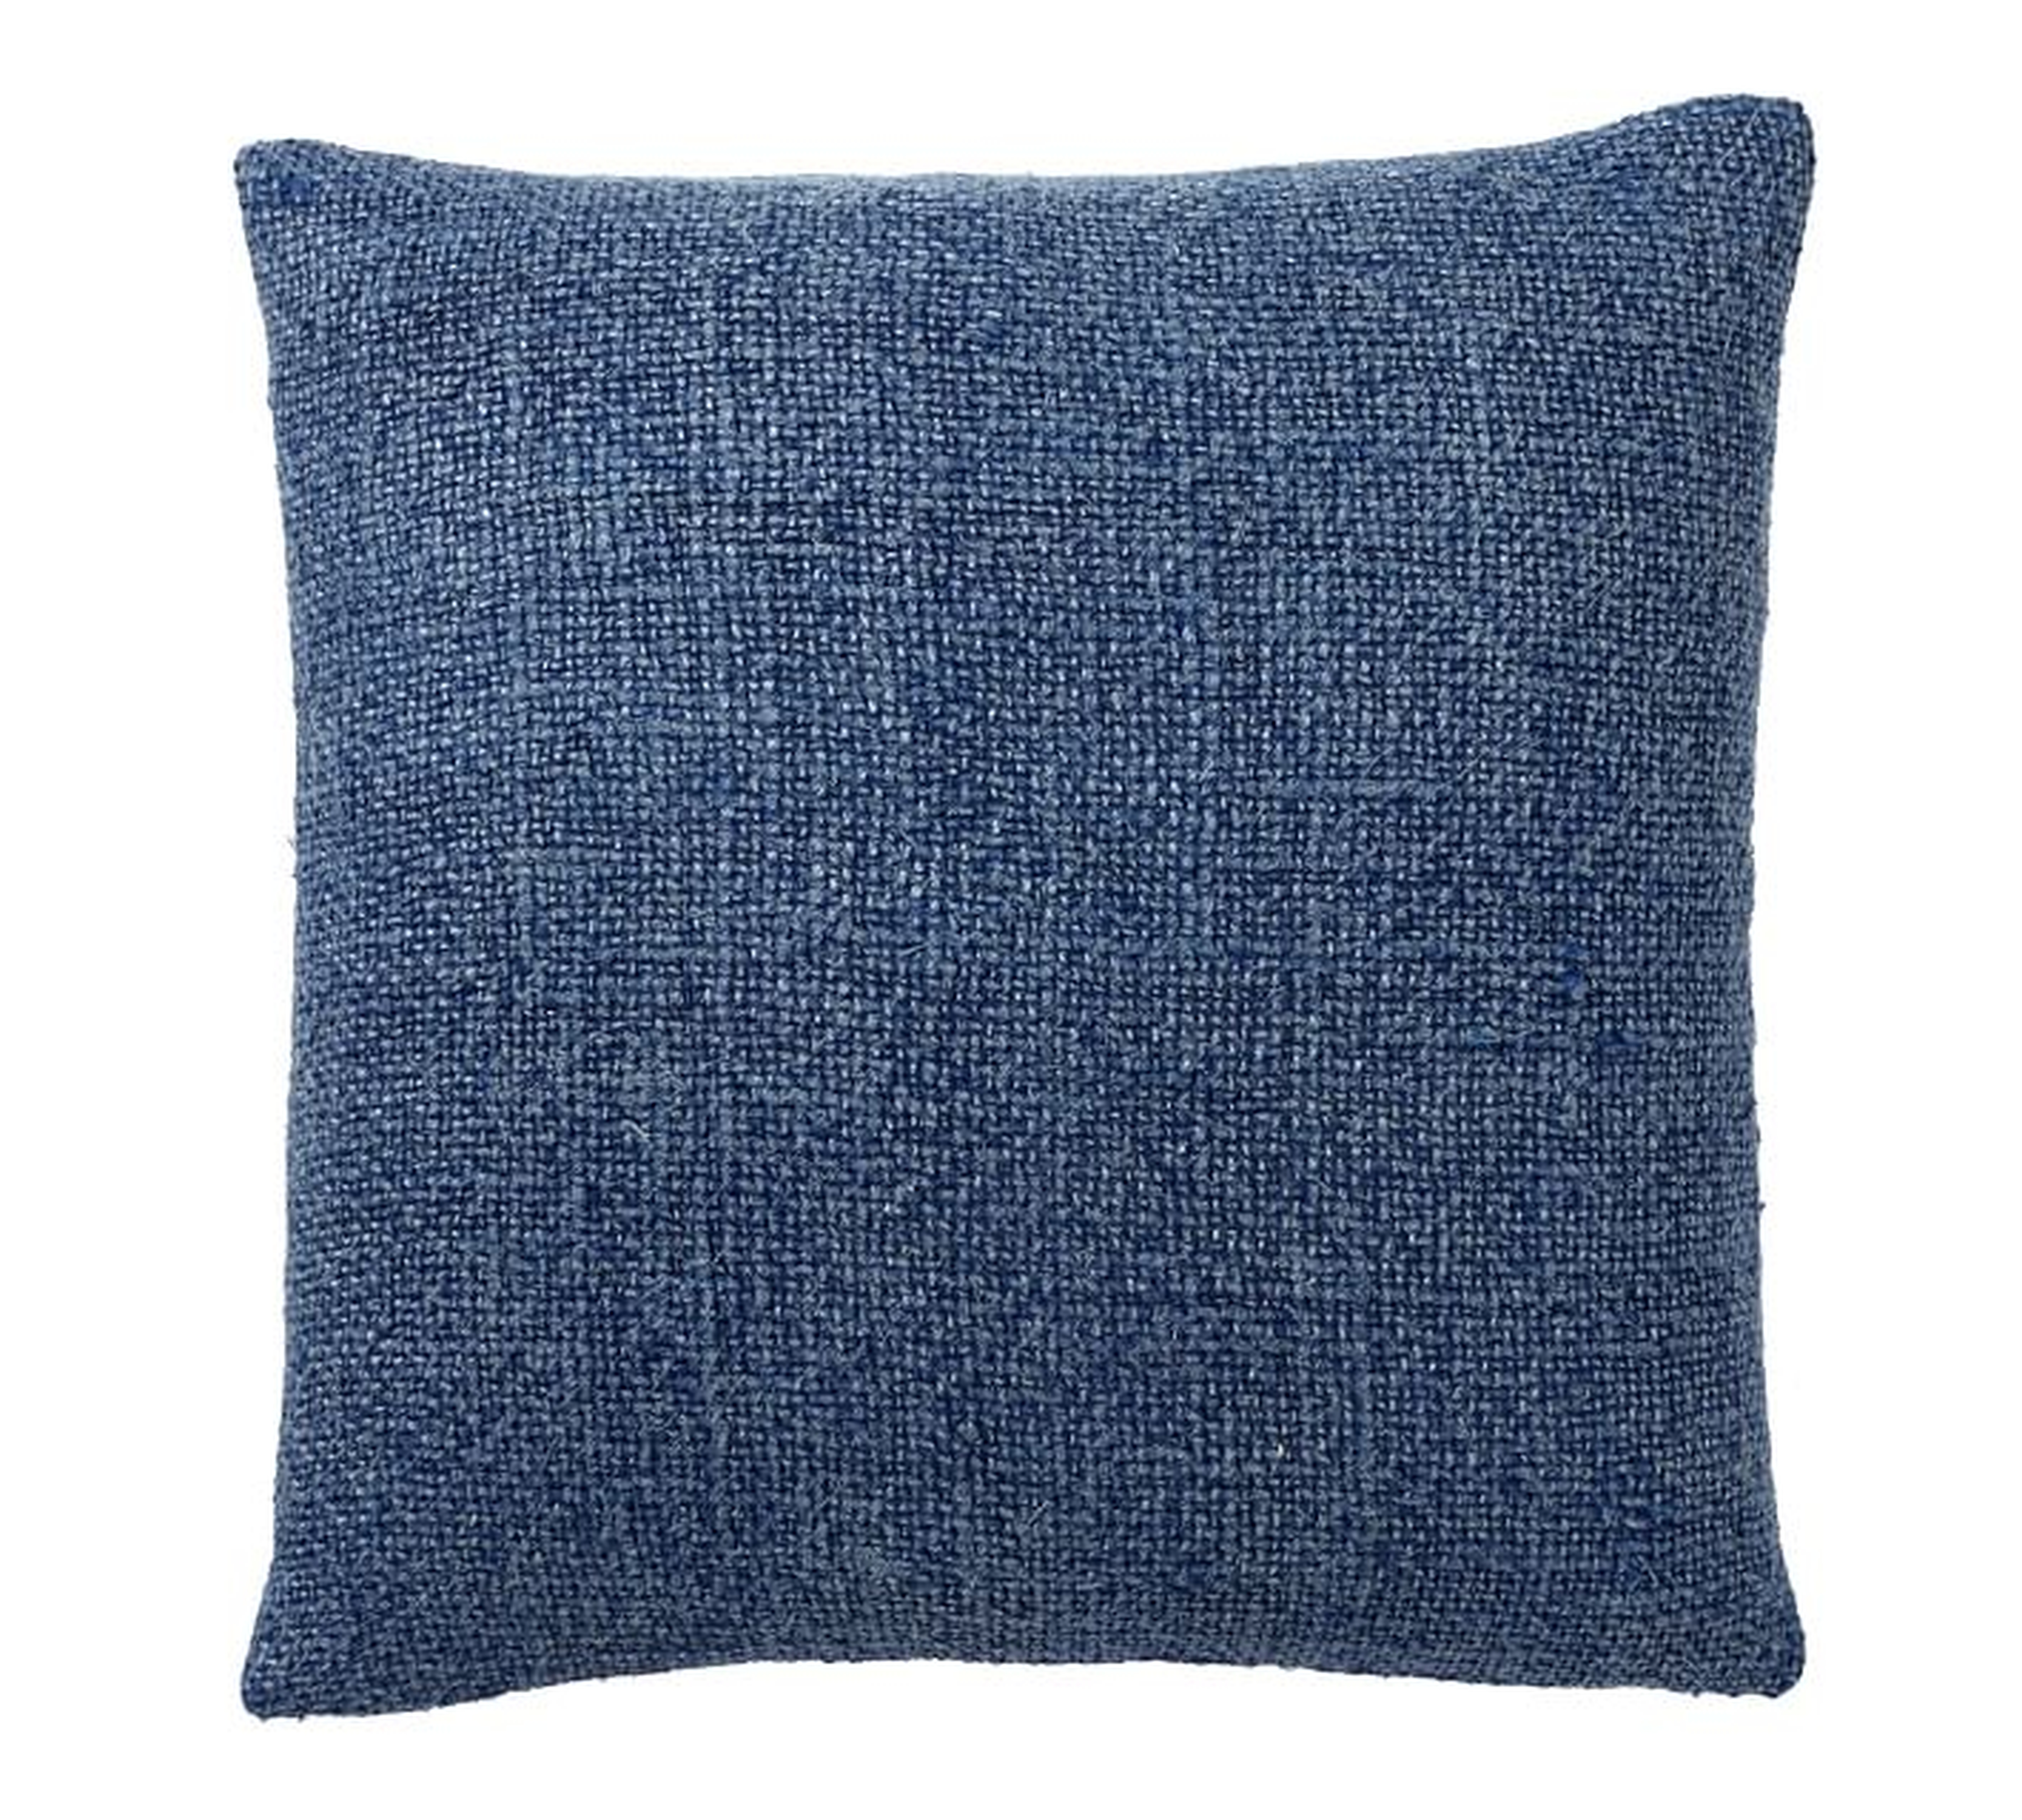 Faye Textured Linen Pillow Cover, 20", Stormy Blue - Pottery Barn